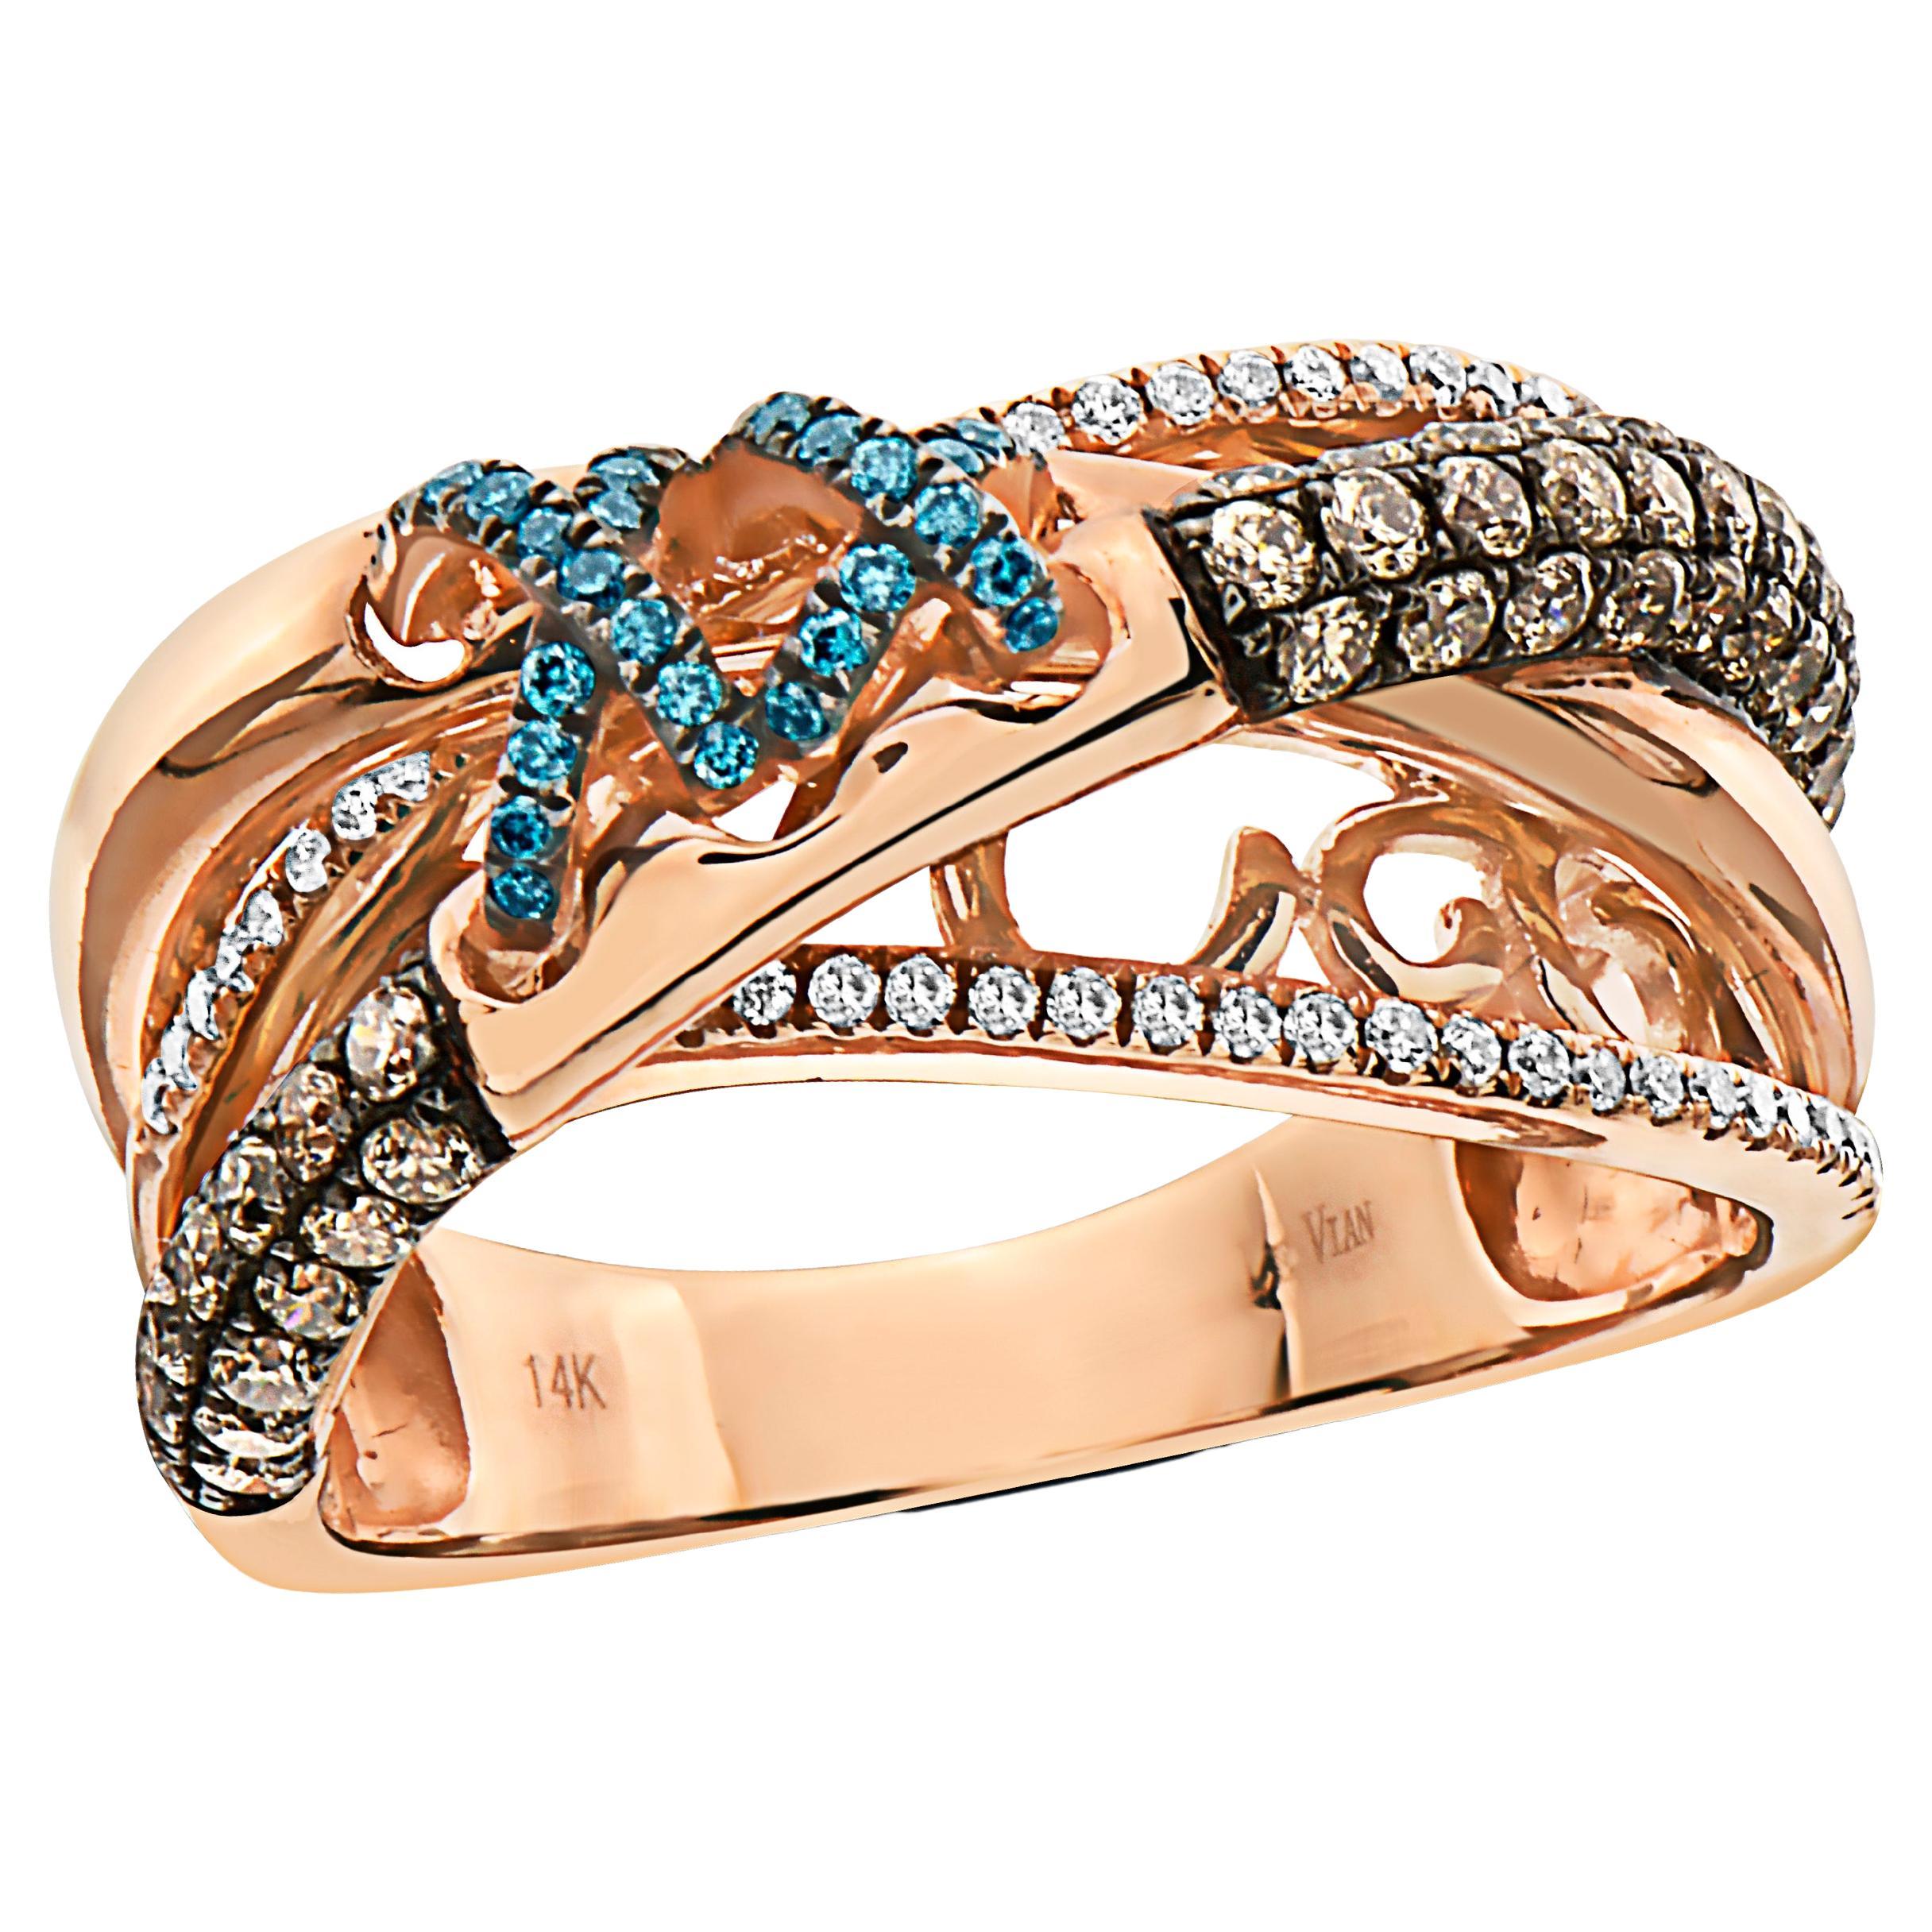 Levian Ring Chocolate Blue and White Diamonds Set in 14K Rose Gold